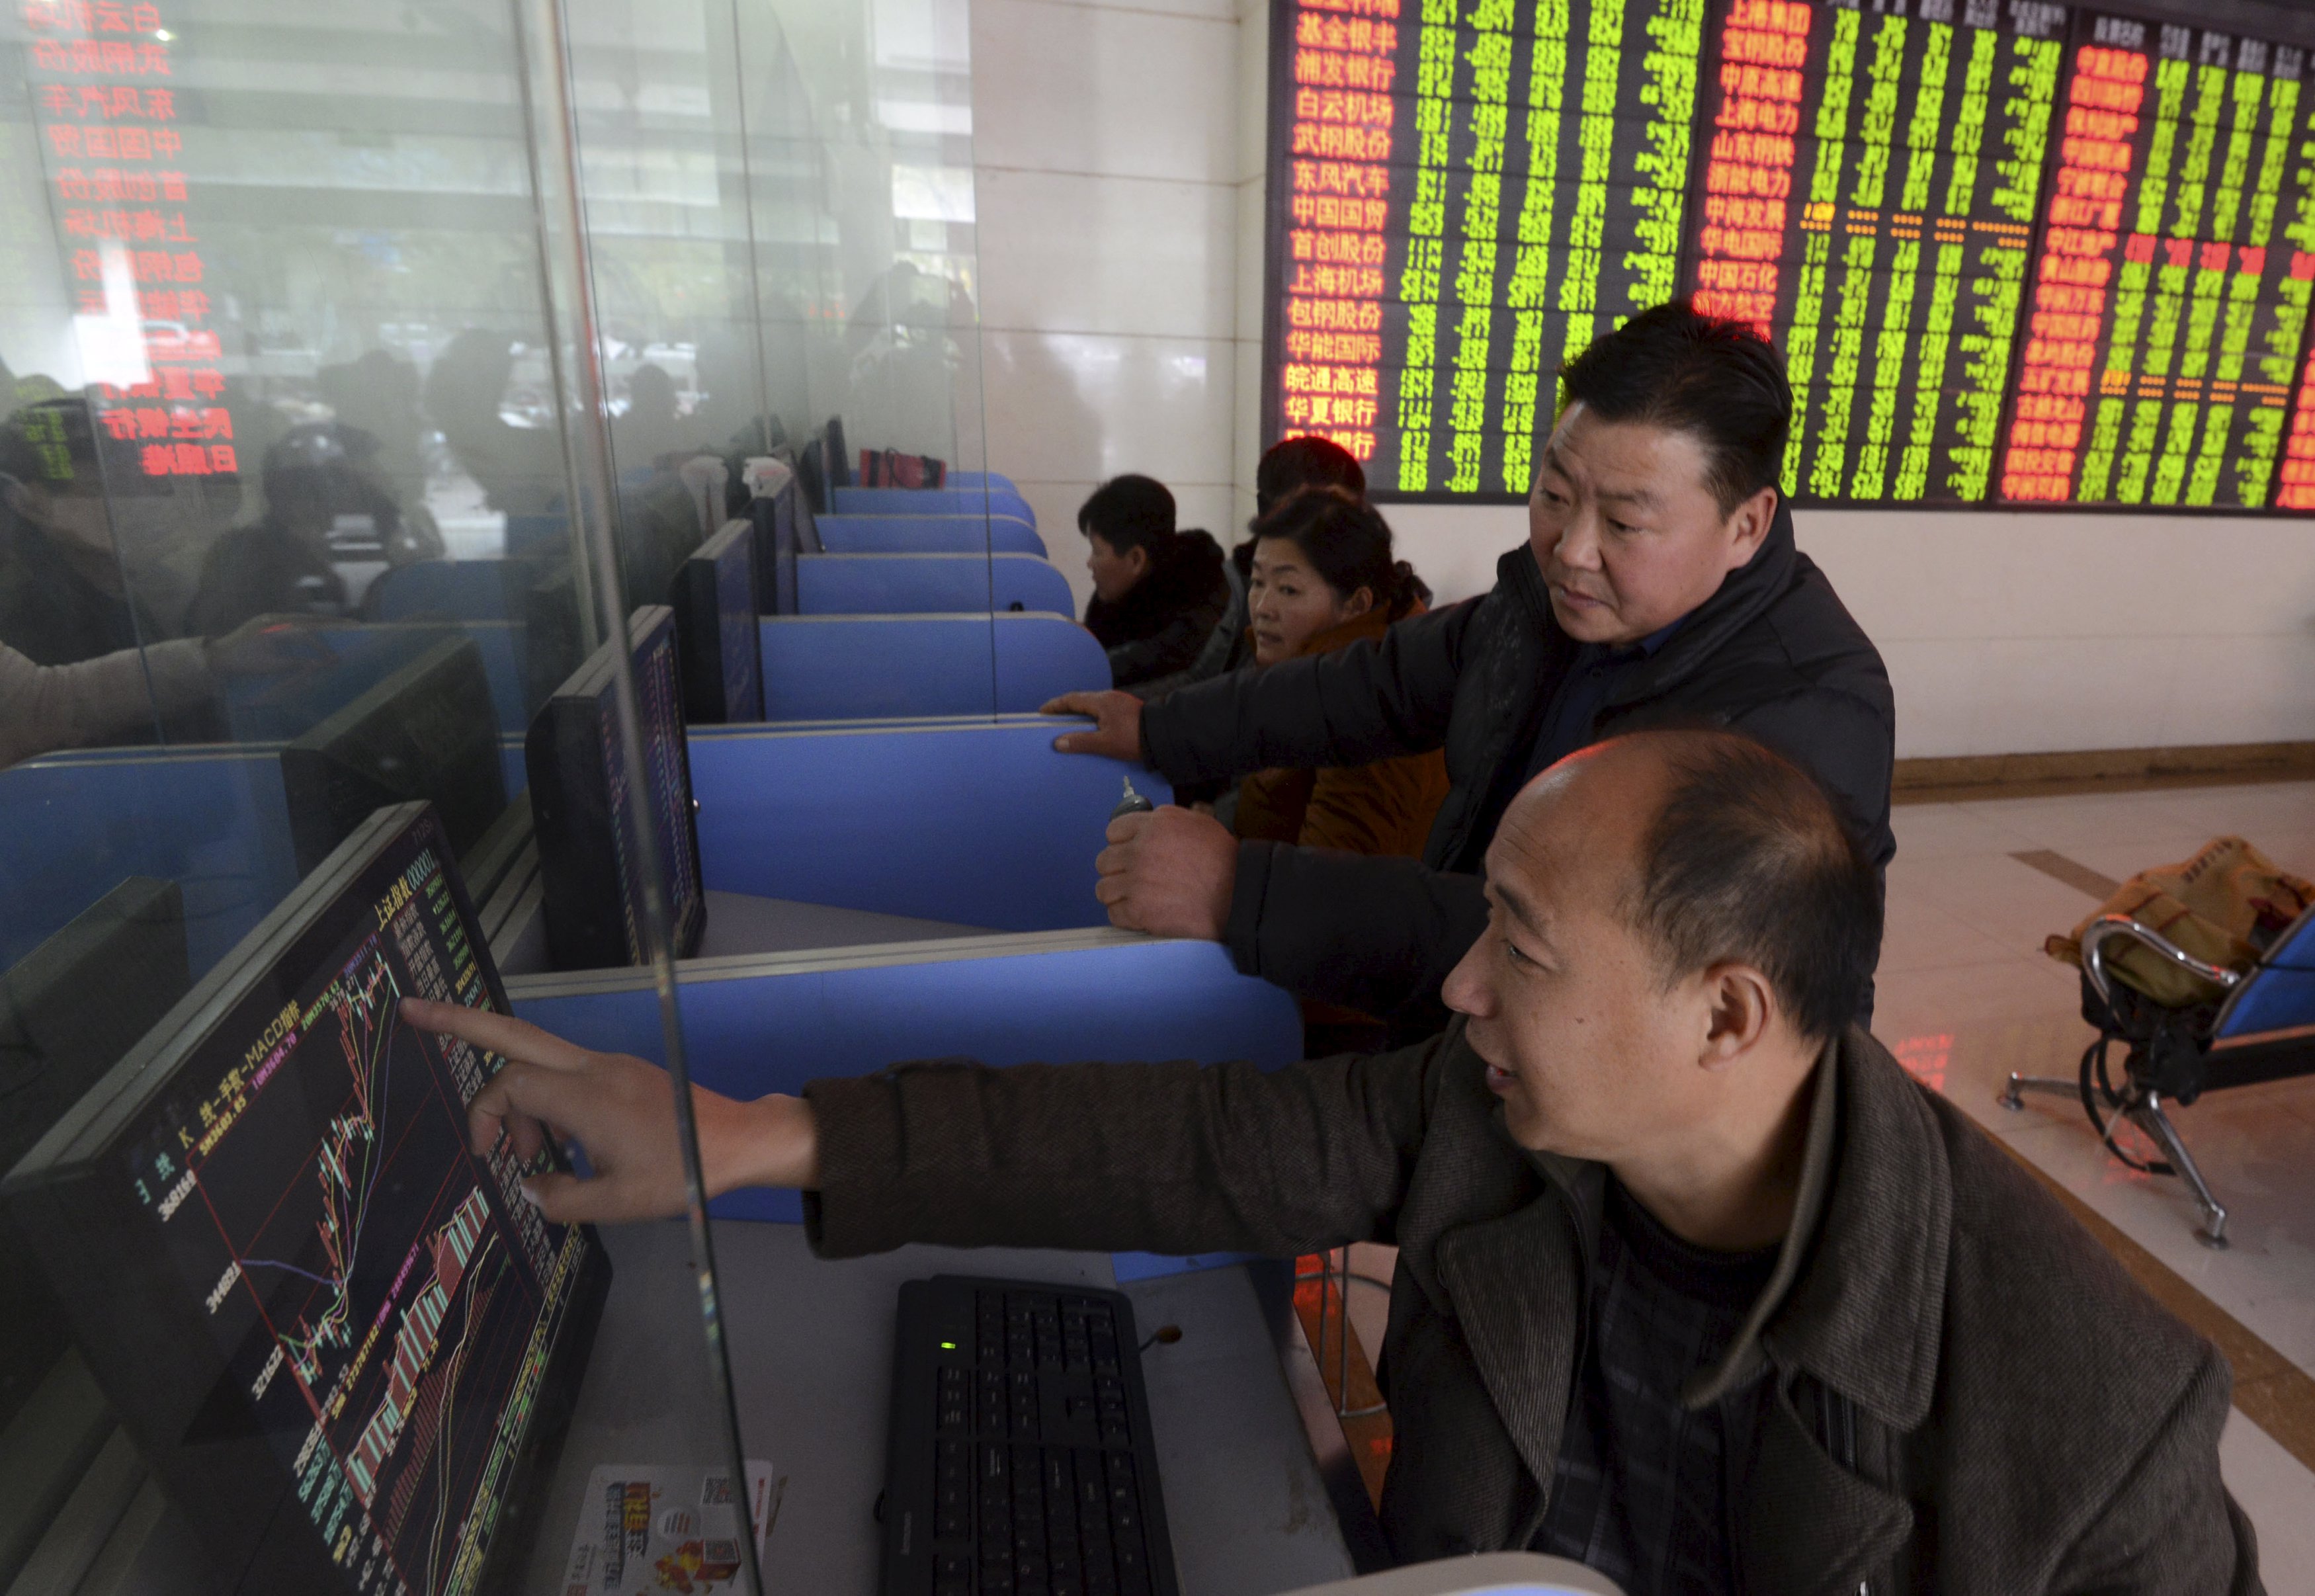 Investors talk as they look at a computer screen showing stock information at a brokerage house in Fuyang, Anhui province, China, November 27, 2015. China stocks tumbled more than 5 percent on Friday in their biggest one-day loss in three months as a fresh regulatory crackdown and deteriorating profits triggered profit-taking after a recent rebound. REUTERS/China Daily CHINA OUT. NO COMMERCIAL OR EDITORIAL SALES IN CHINA